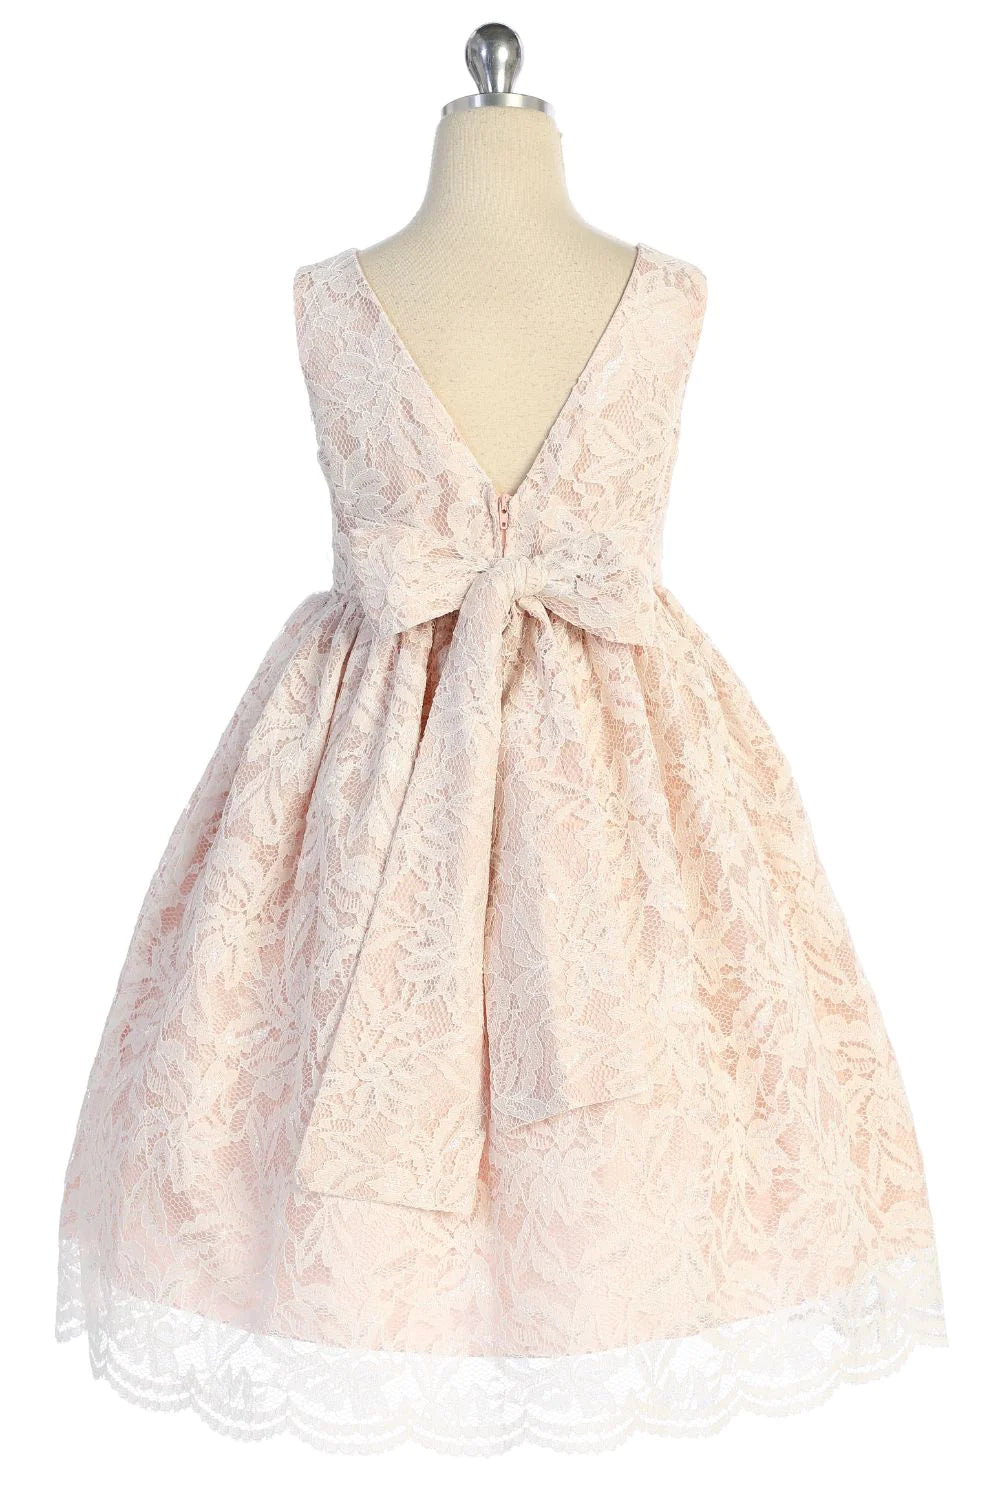 Lace V Back Bow Dress Off White/Blush by Kid's Dream